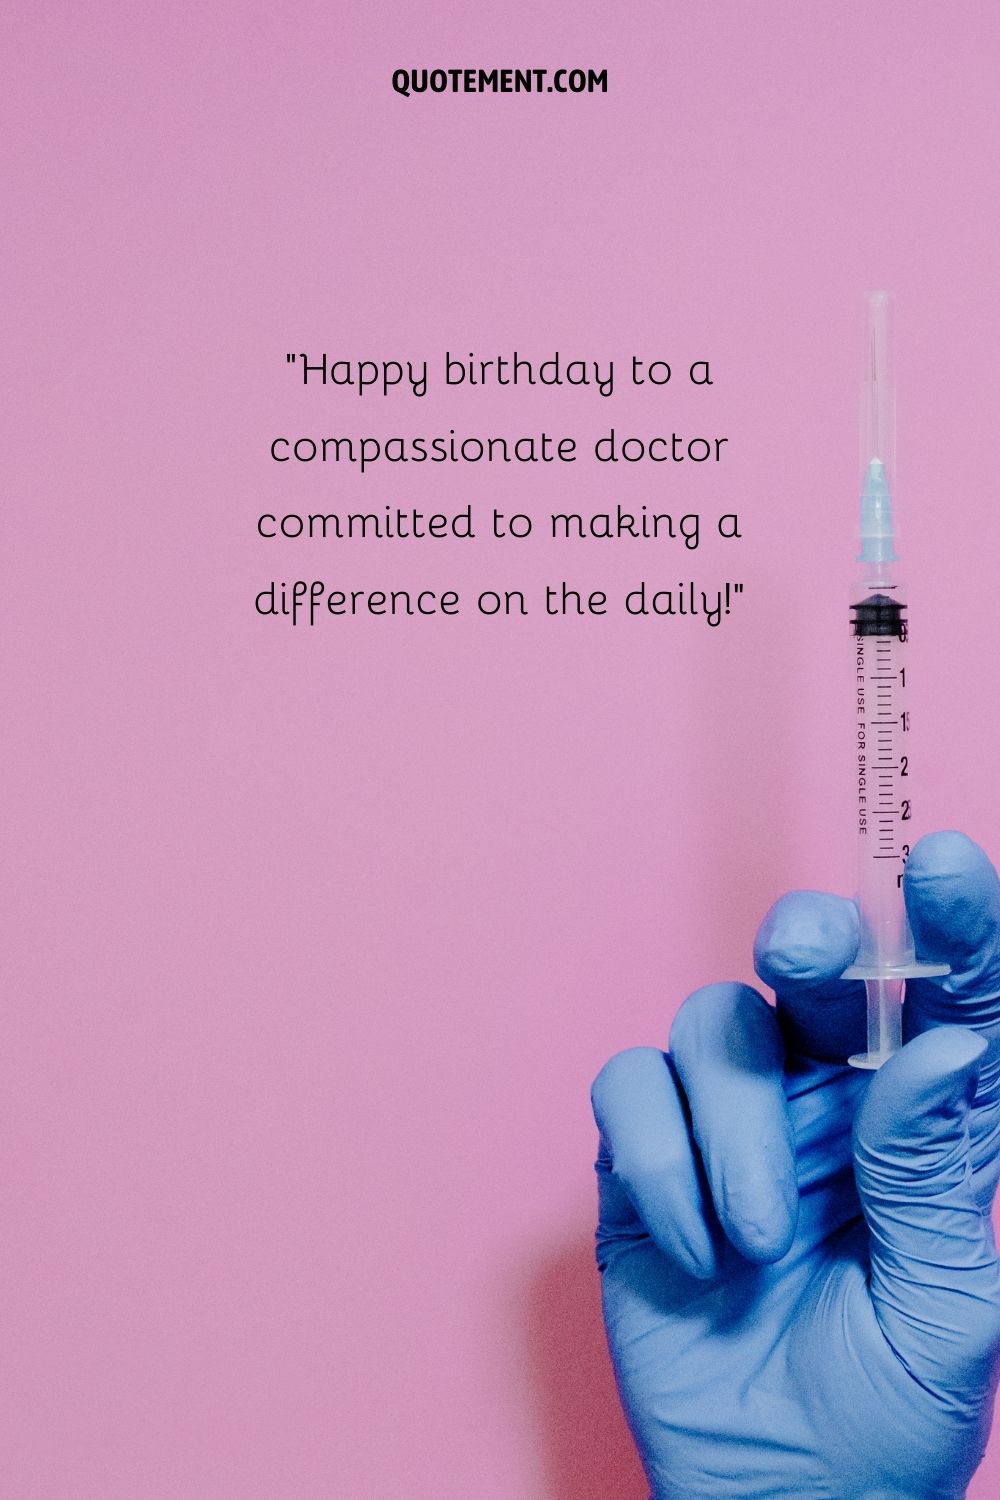 blue gloves holding an injection representing short birthday wishes to dr